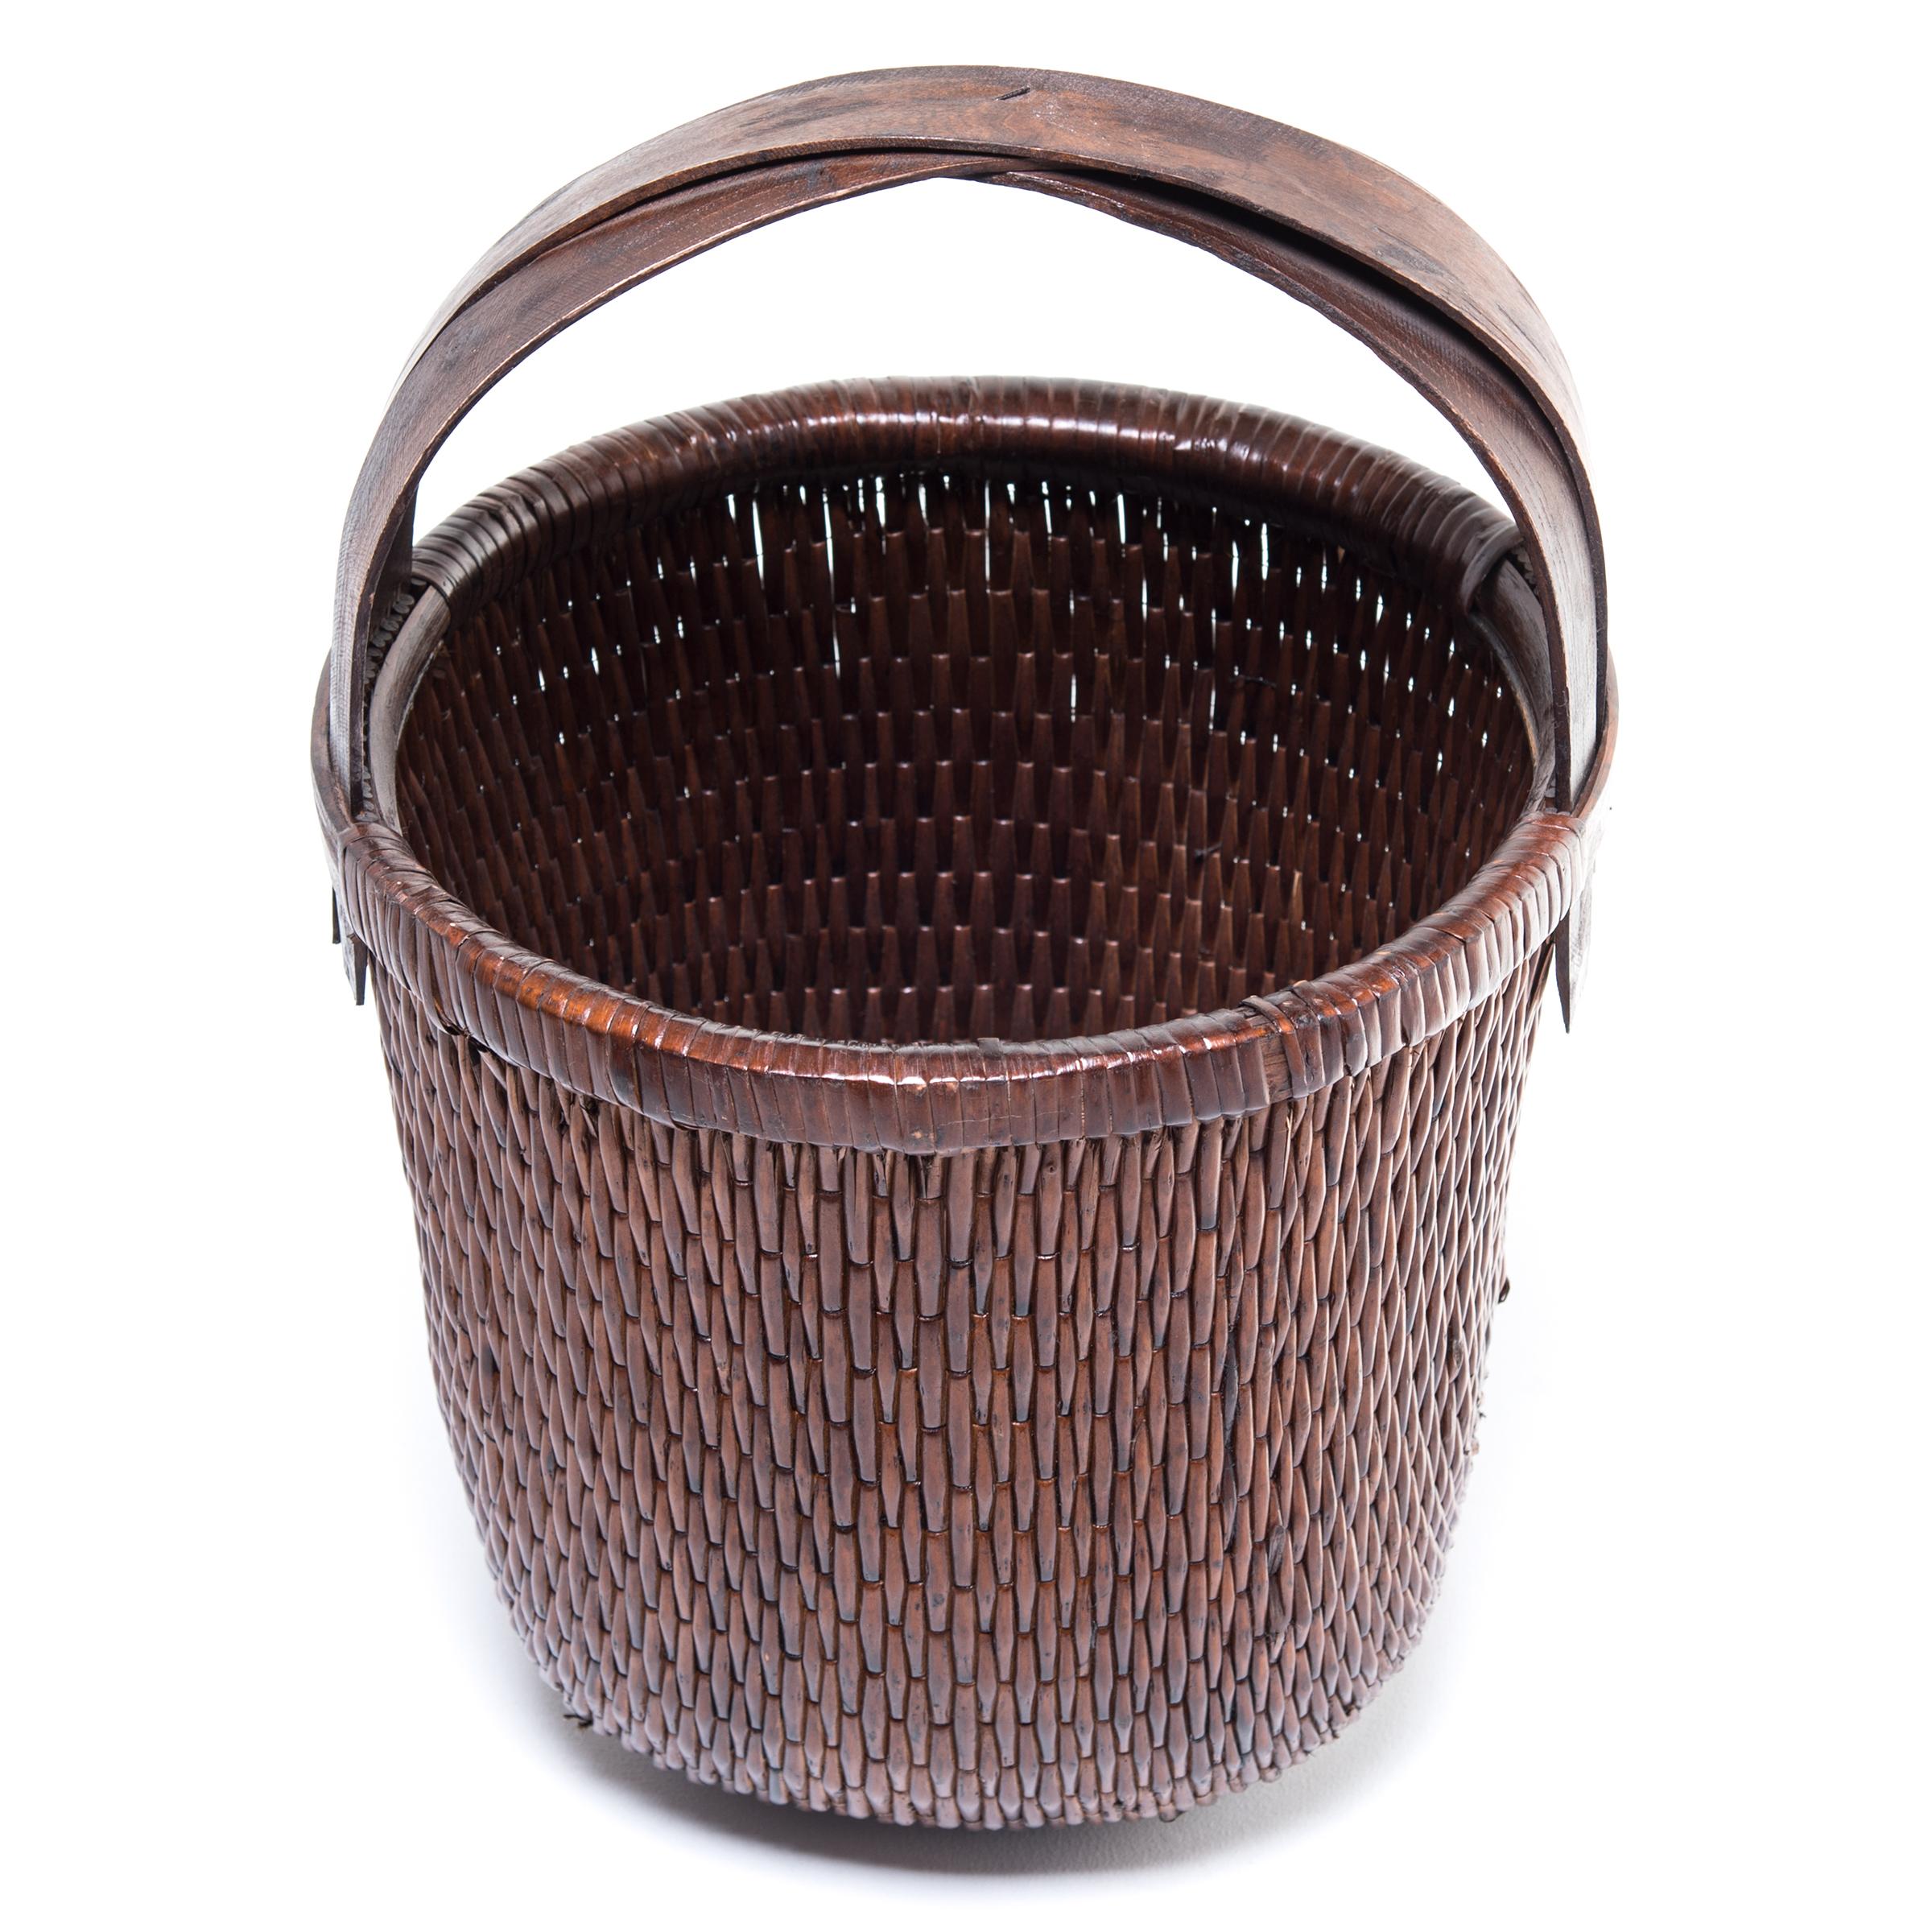 20th Century Chinese Bent Handle Fisherman's Basket, c. 1900 For Sale